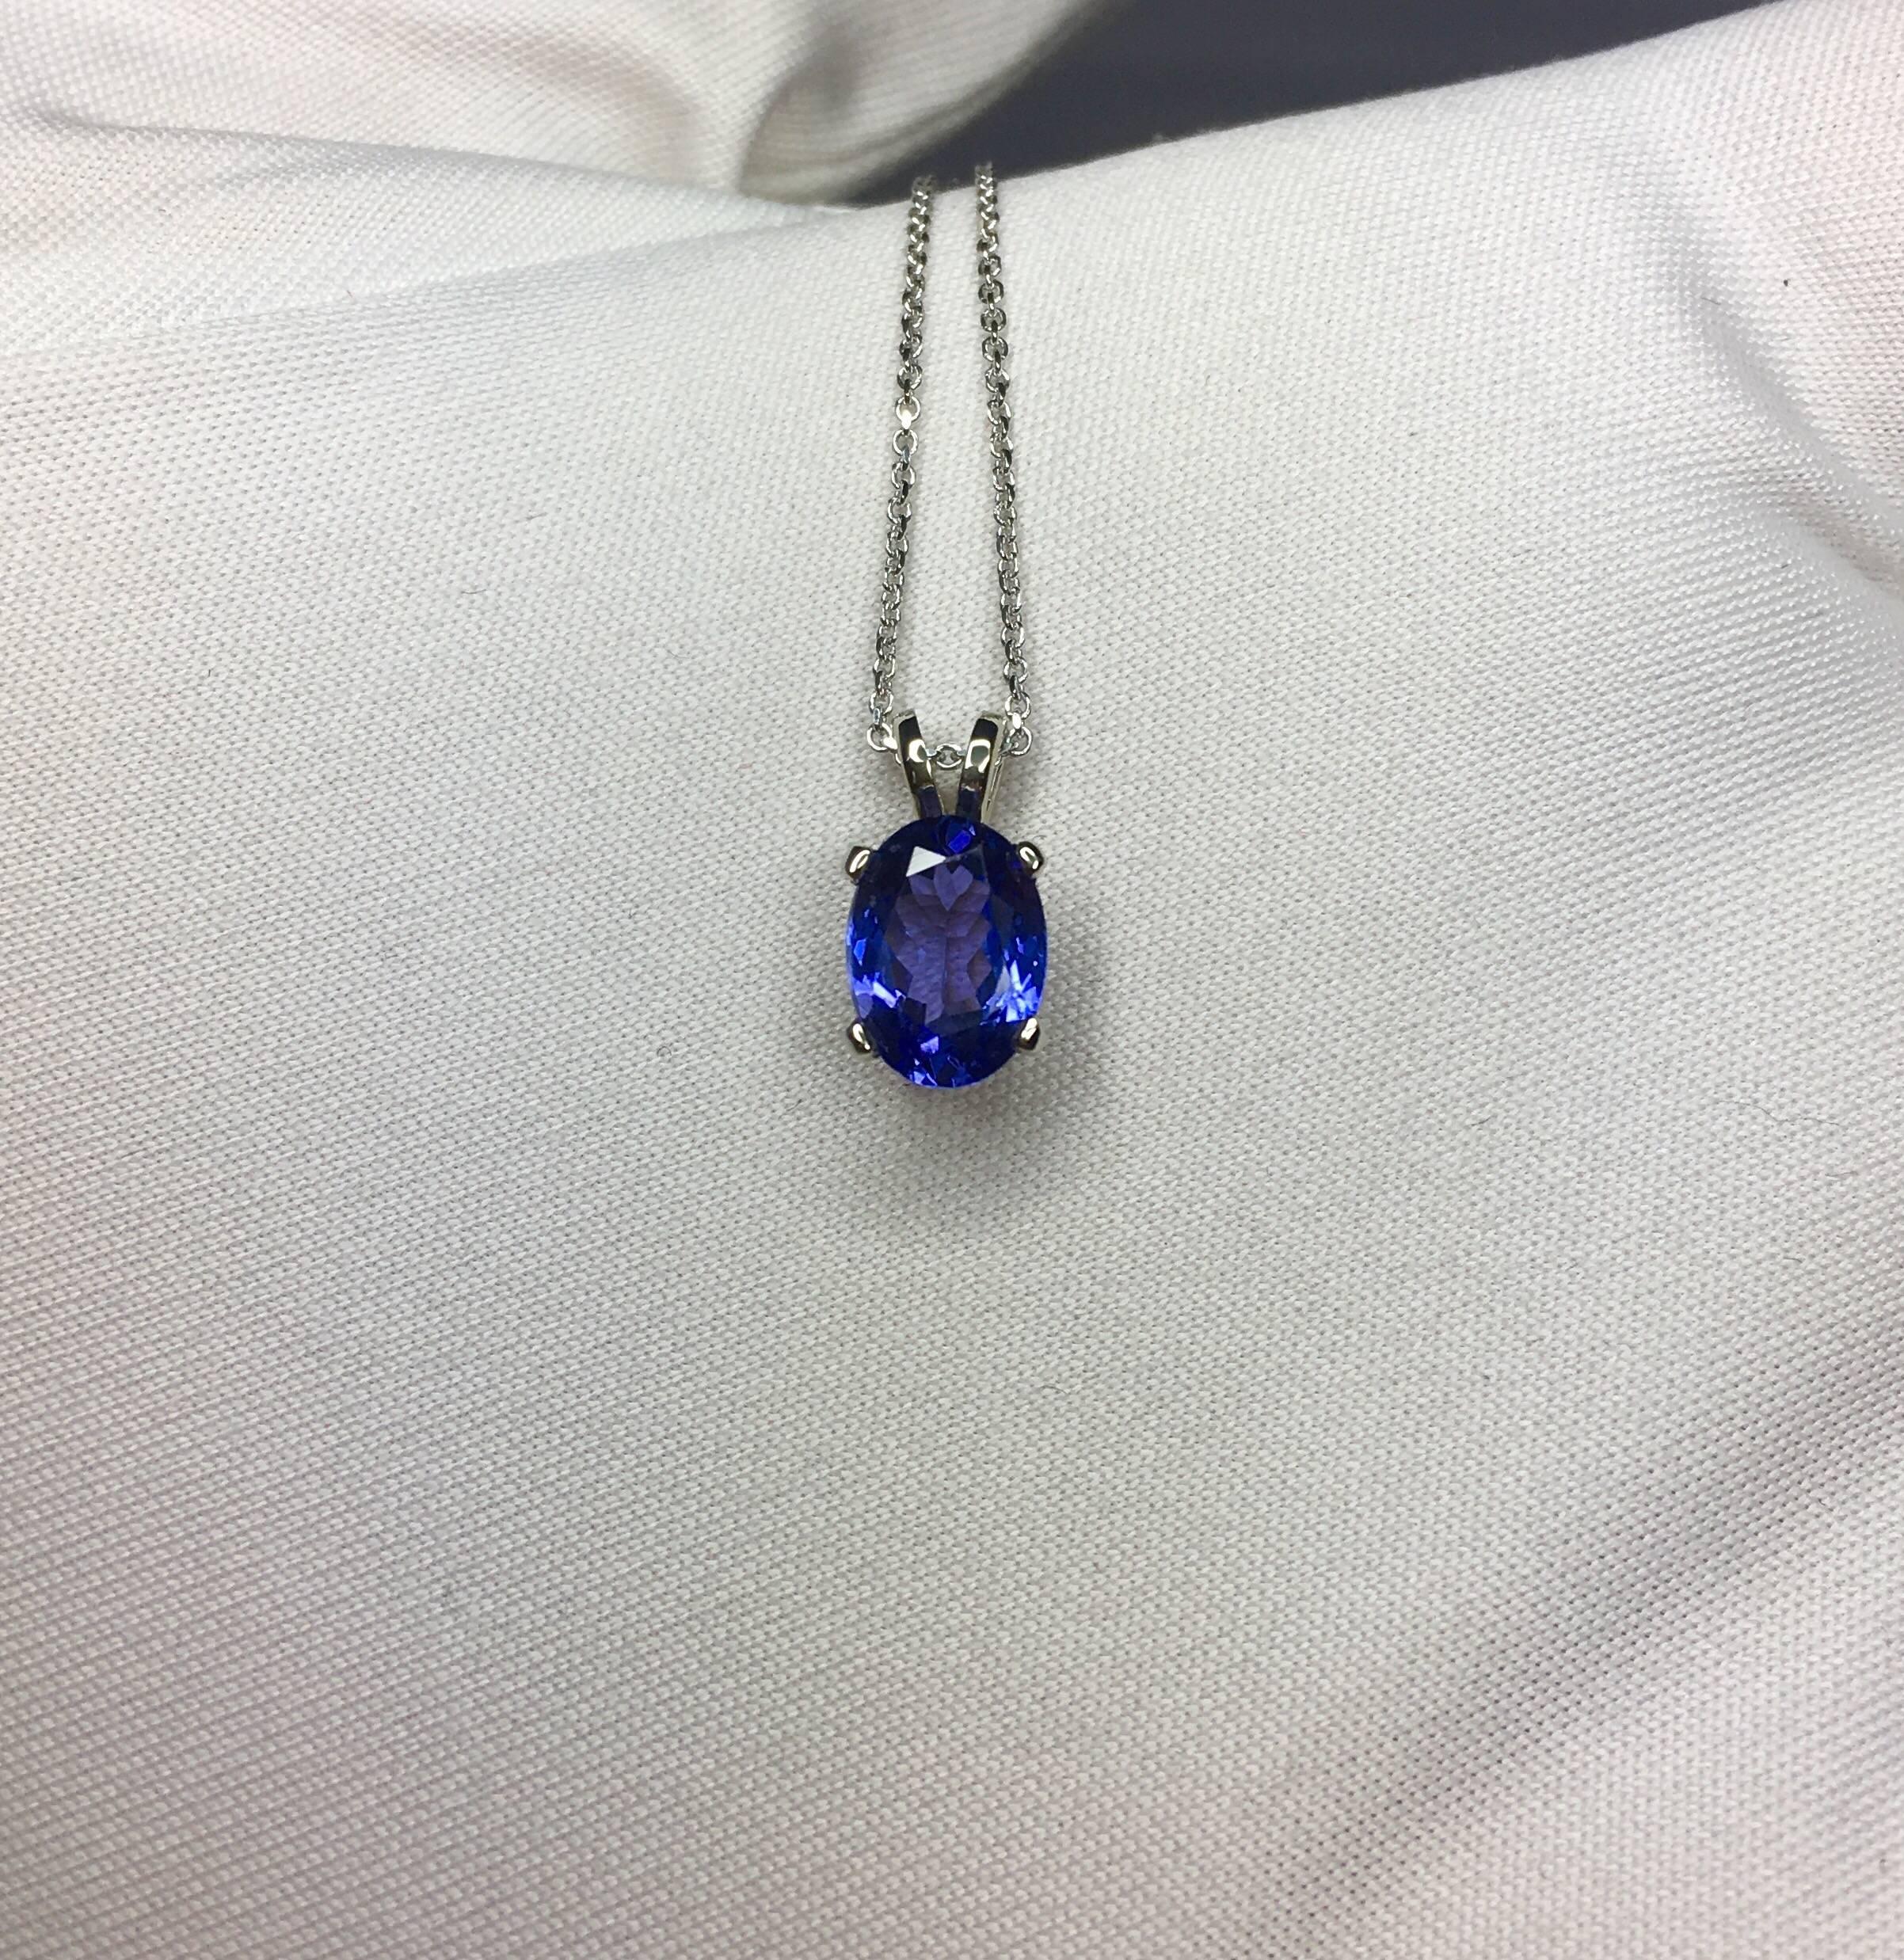 Stunning natural intense violet blue tanzanite solitaire pendant.

1.30 carat stone with excellent colour and clarity. Intense violet blue colour and practically flawless.

The pendant is hanging on a 16